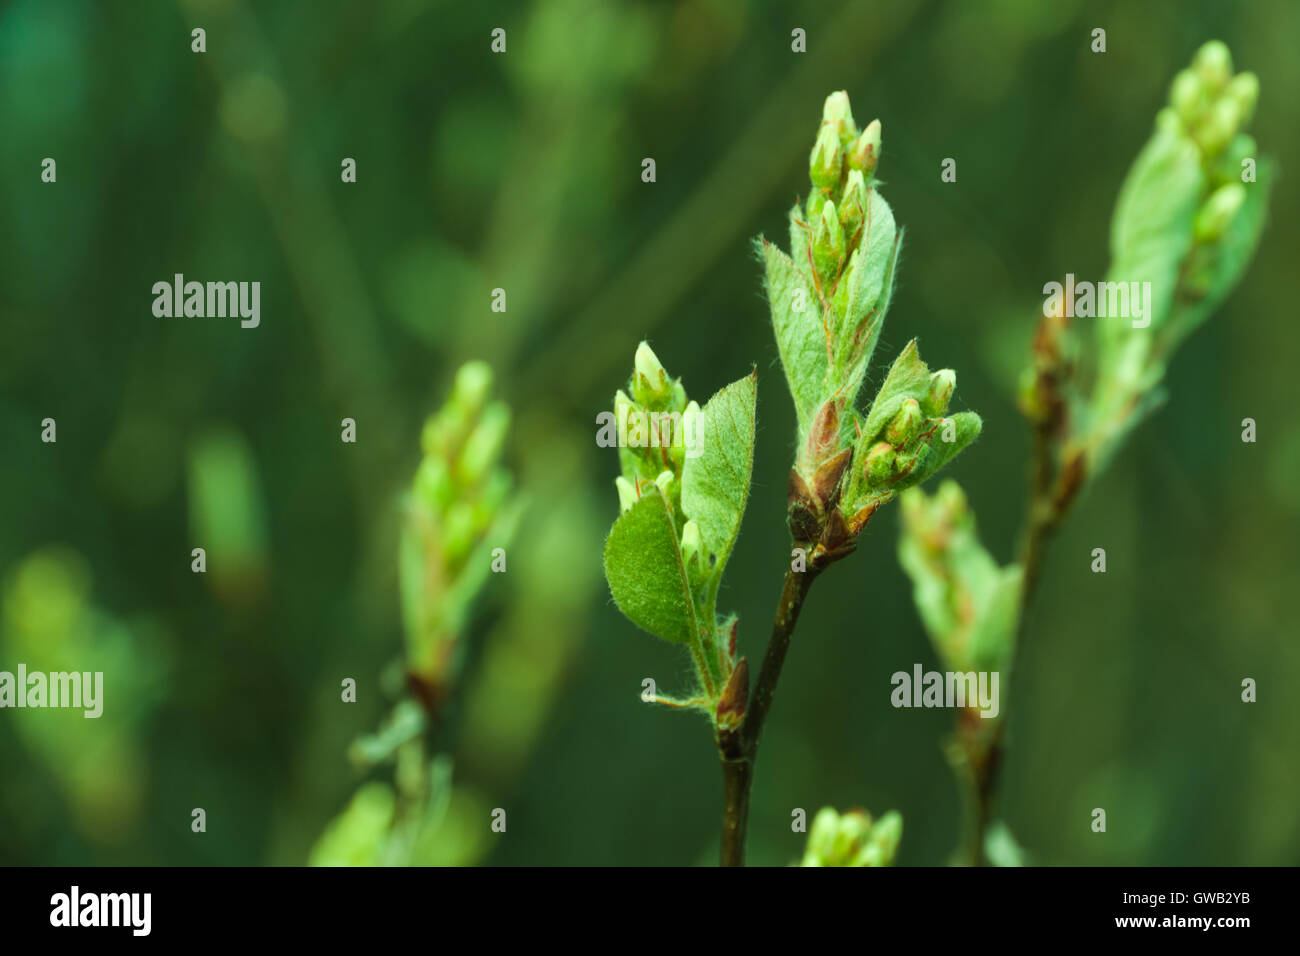 Natural seasonal spring eco backgrond: pattern of apple-tree branch with young green foliage Stock Photo